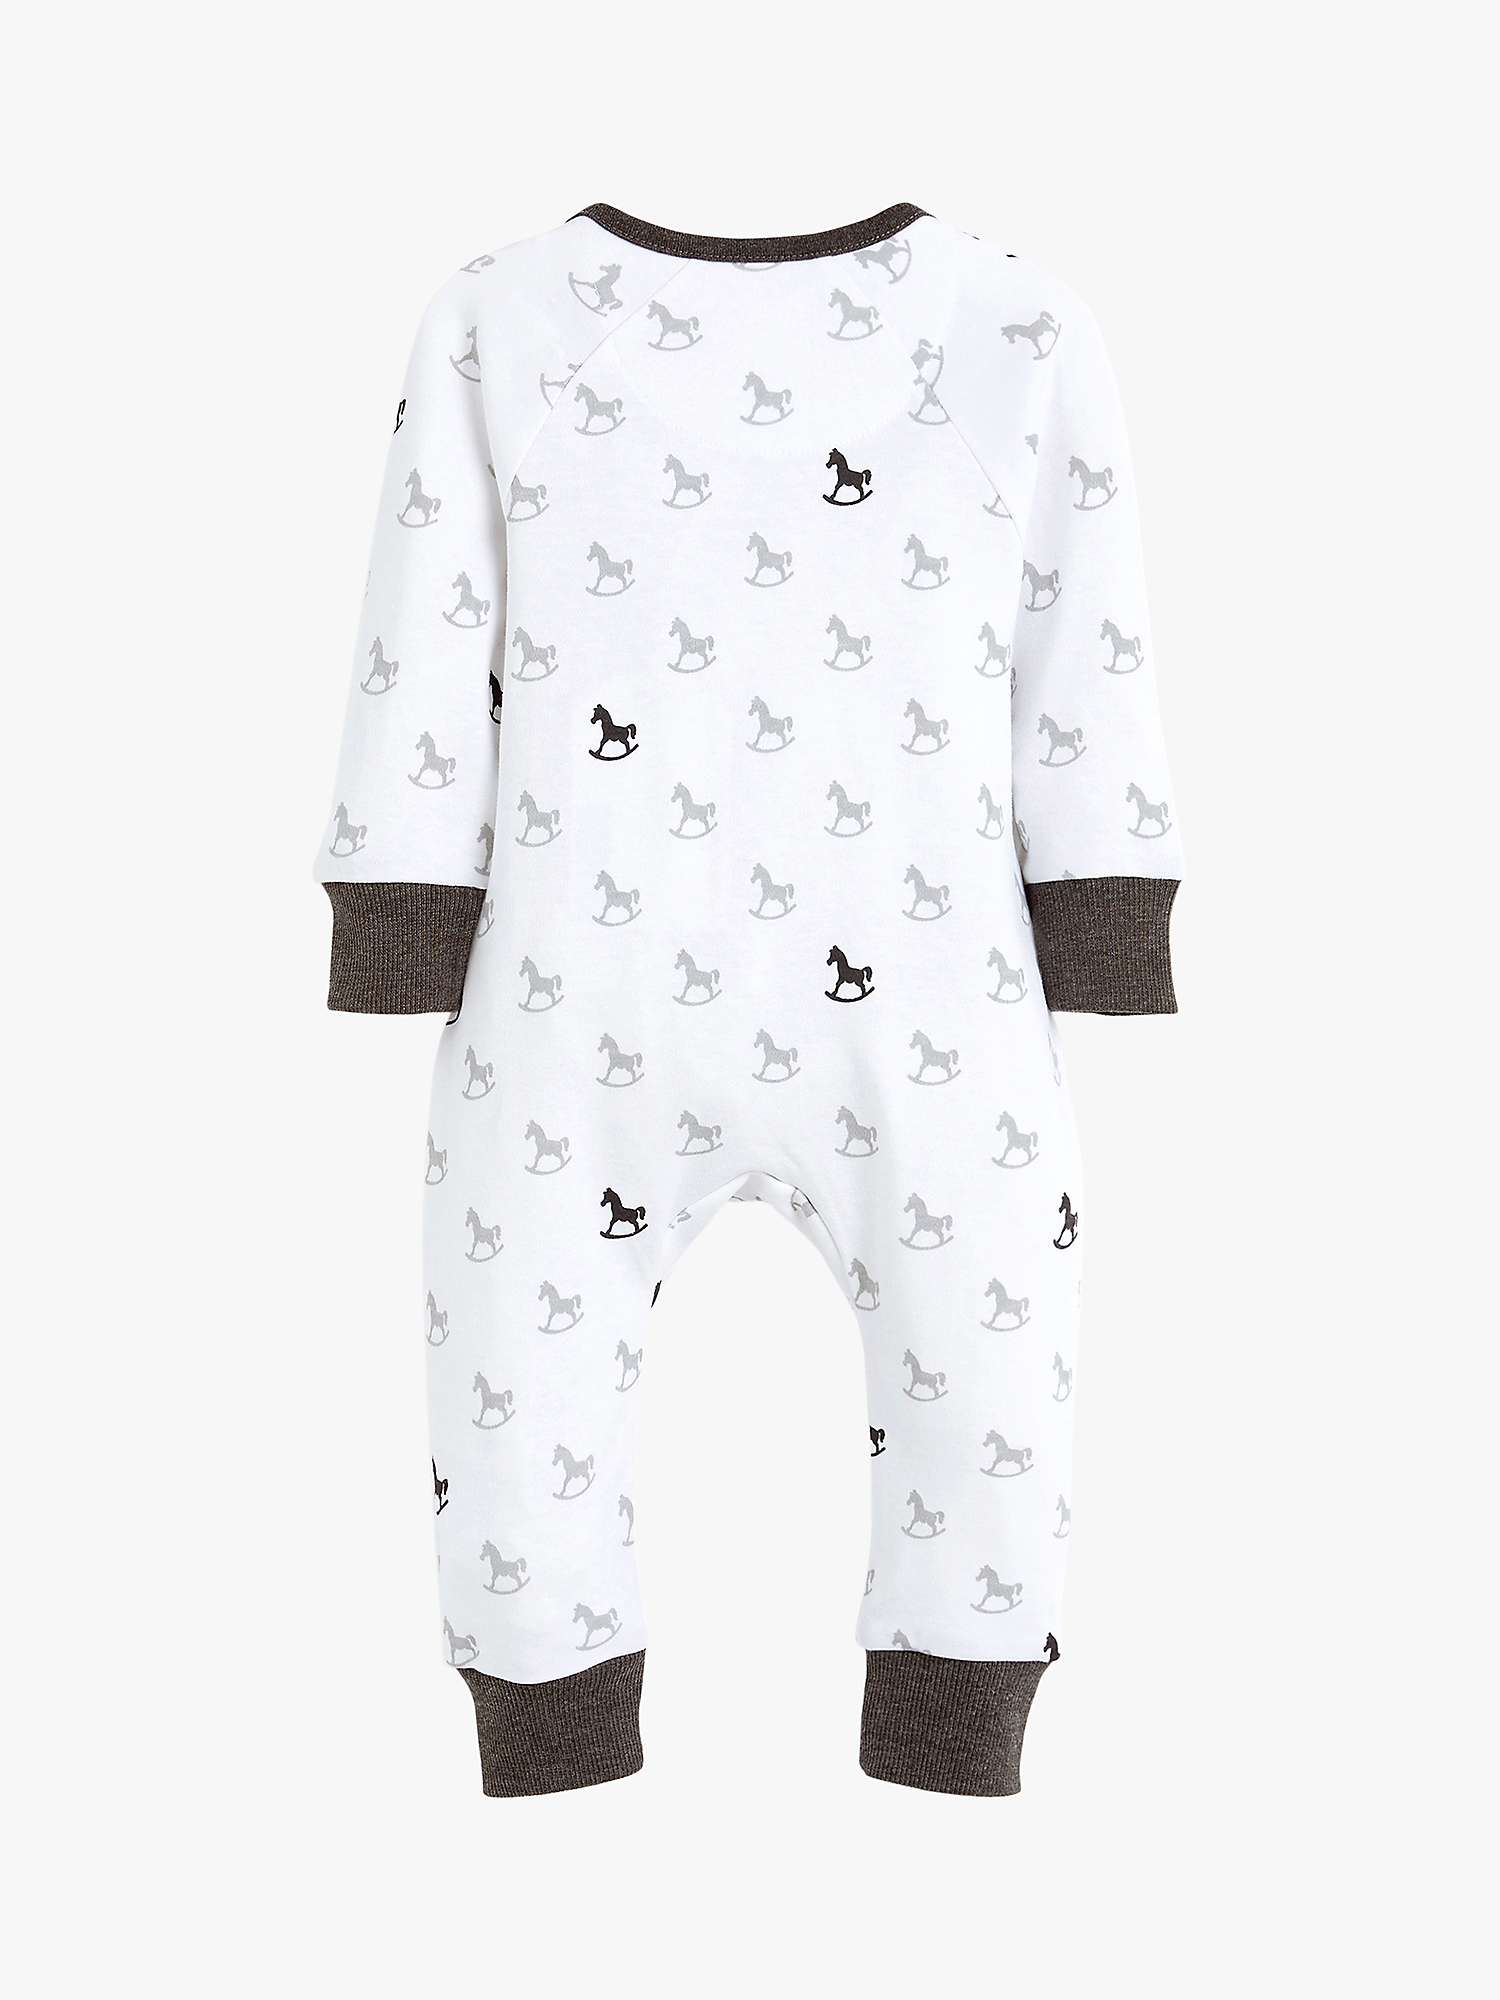 Buy The Little Tailor Baby Rocking Horse Print Cotton Jersey Slim Fit Onesie Online at johnlewis.com